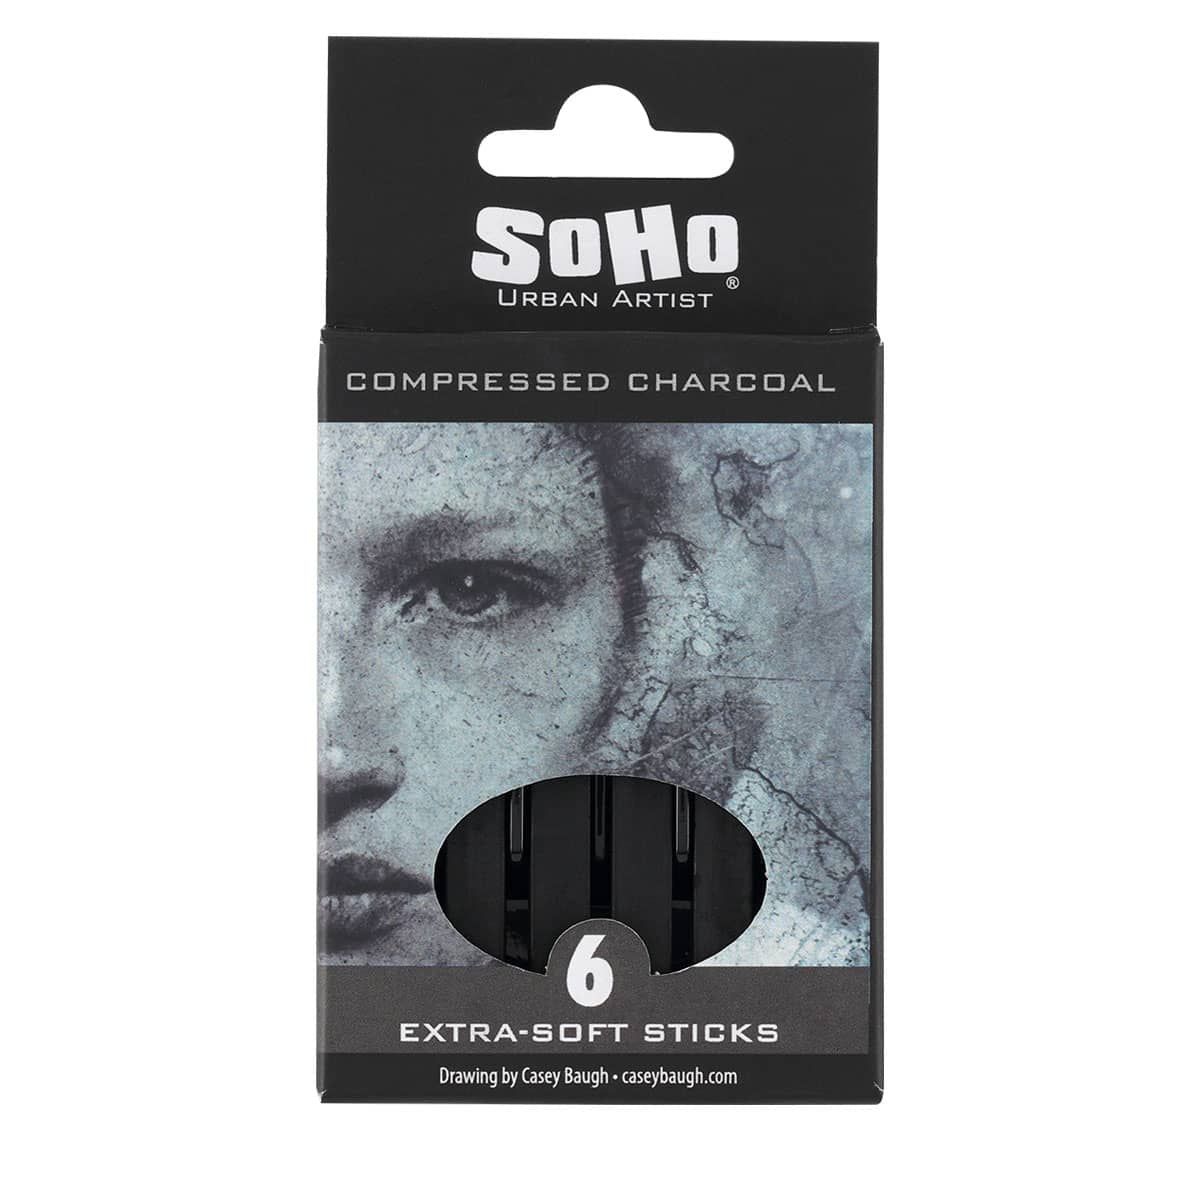 Soho Urban Artist Compressed Charcoal, Extra-Soft Pack of 6